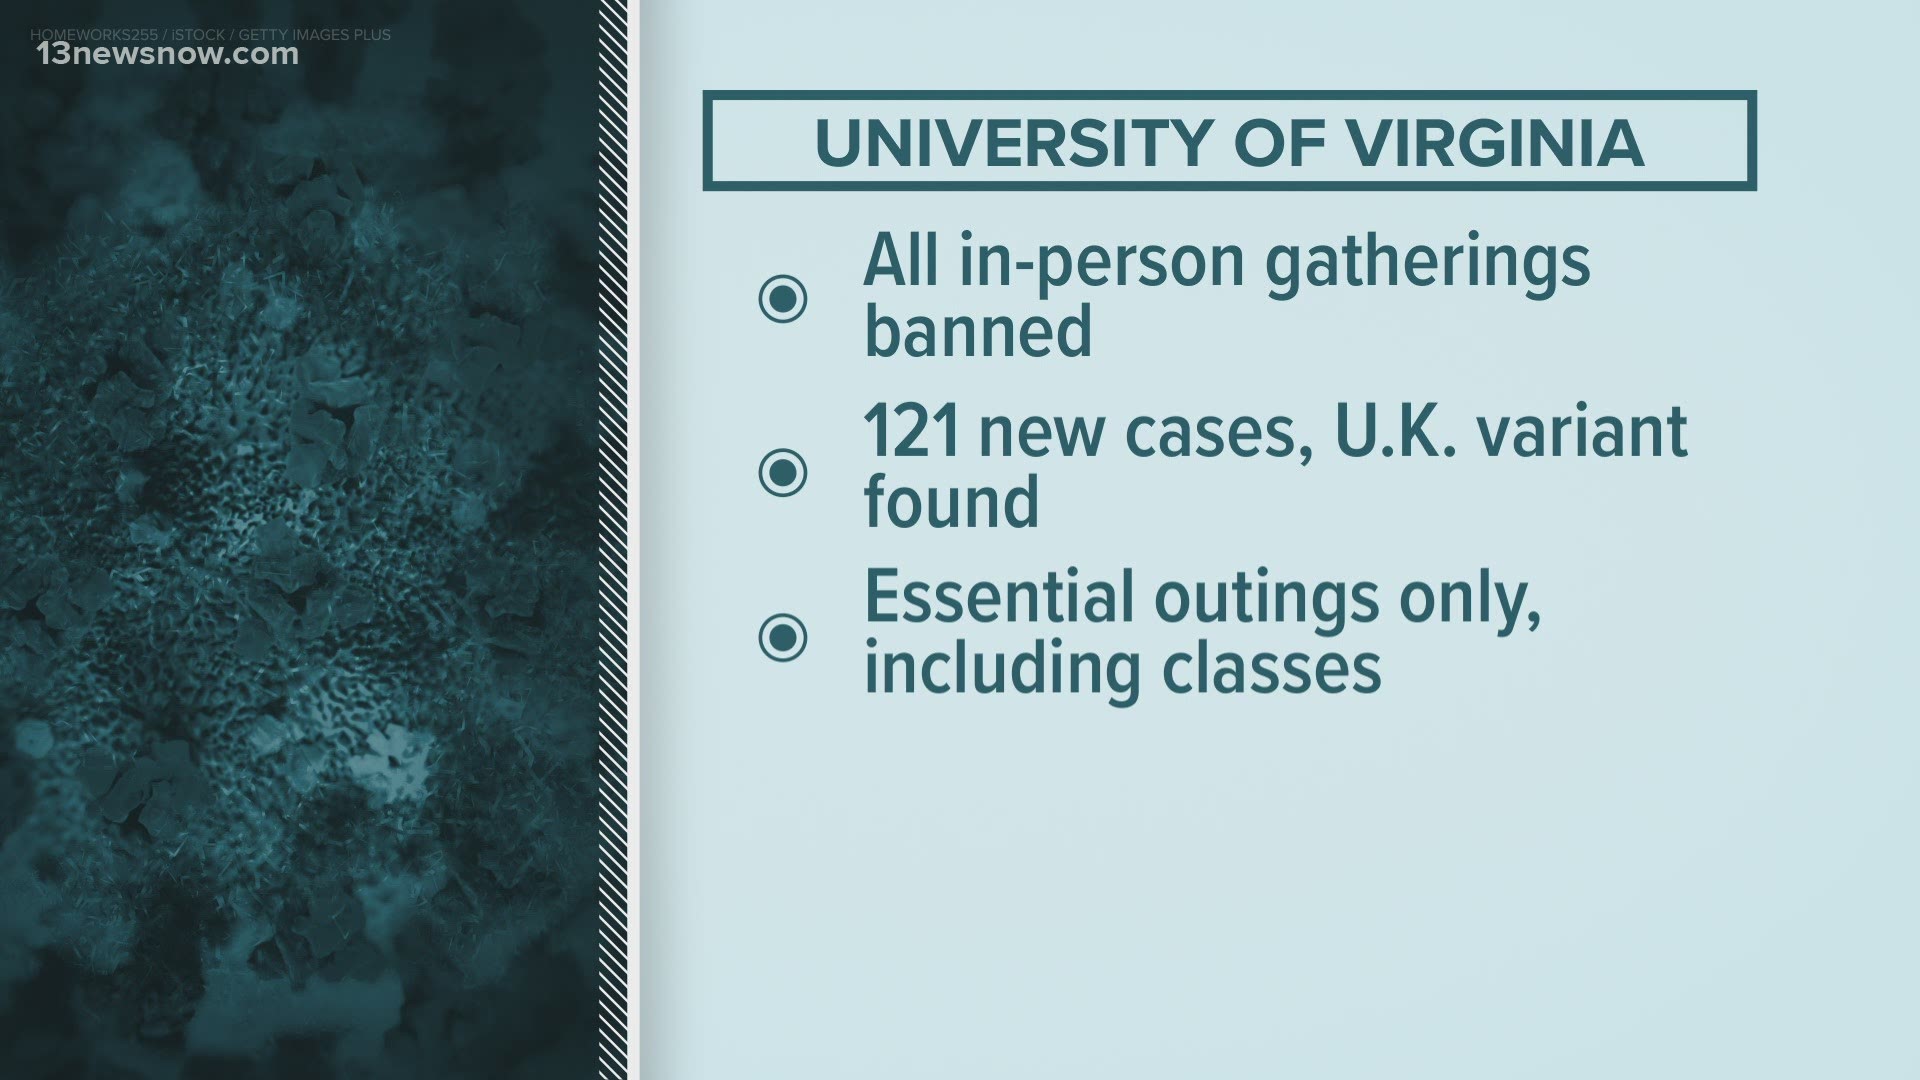 The University of Virginia's COVID tracker reported 121 new cases on Monday. Officials also confirmed the UK variant is in the university community.